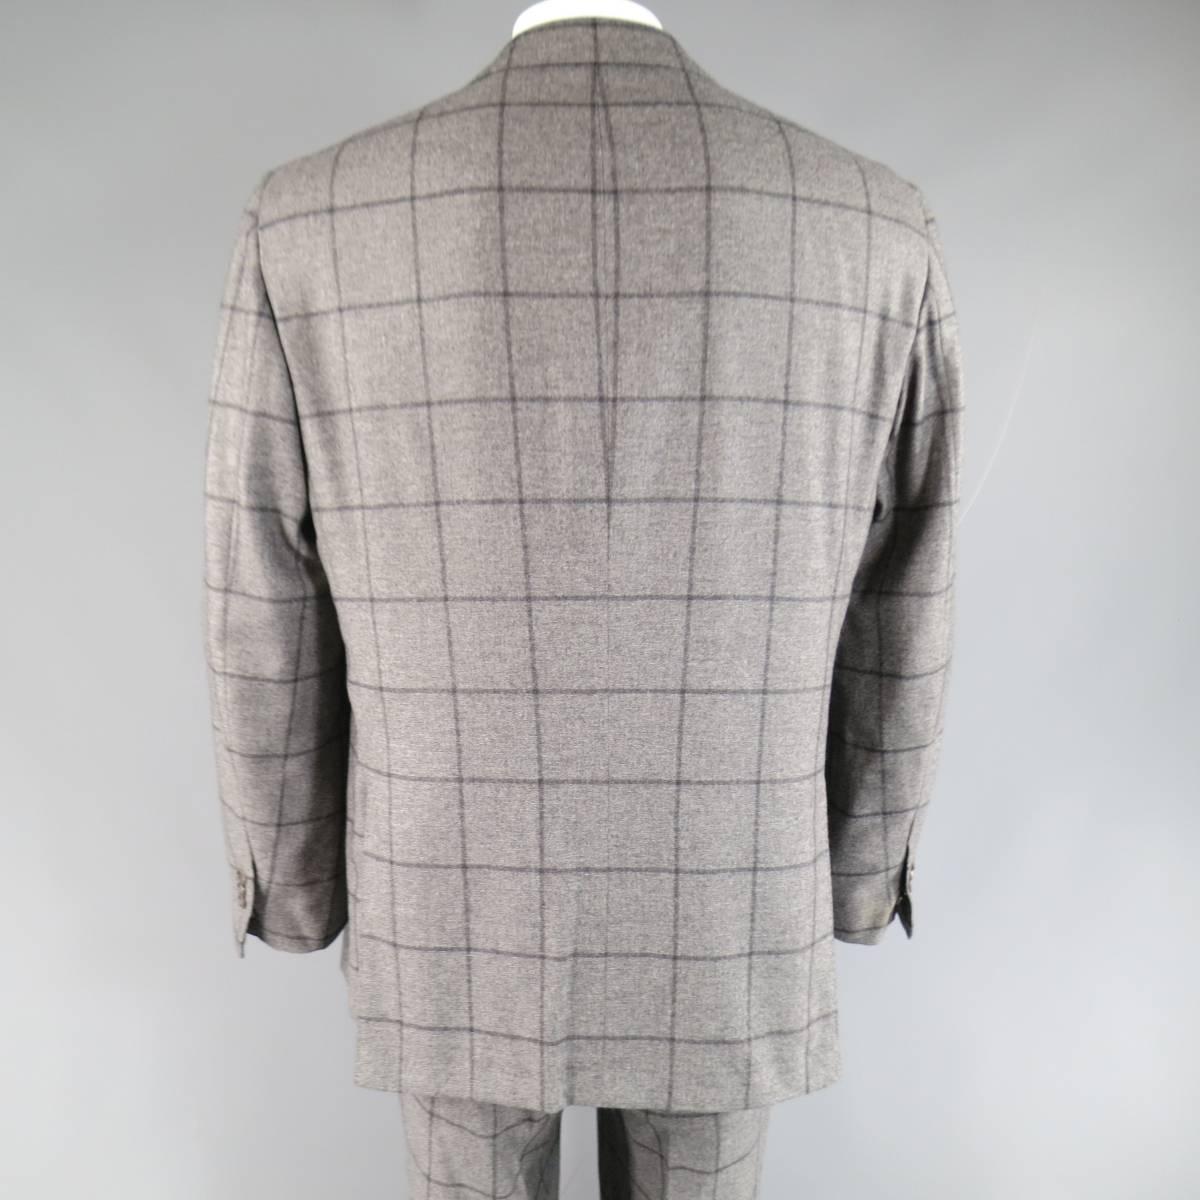 Kiton Men's Suit 46 R 3 Button Gray Windowpane Cashmere Notch Lapel Jacket Pants In Good Condition In San Francisco, CA